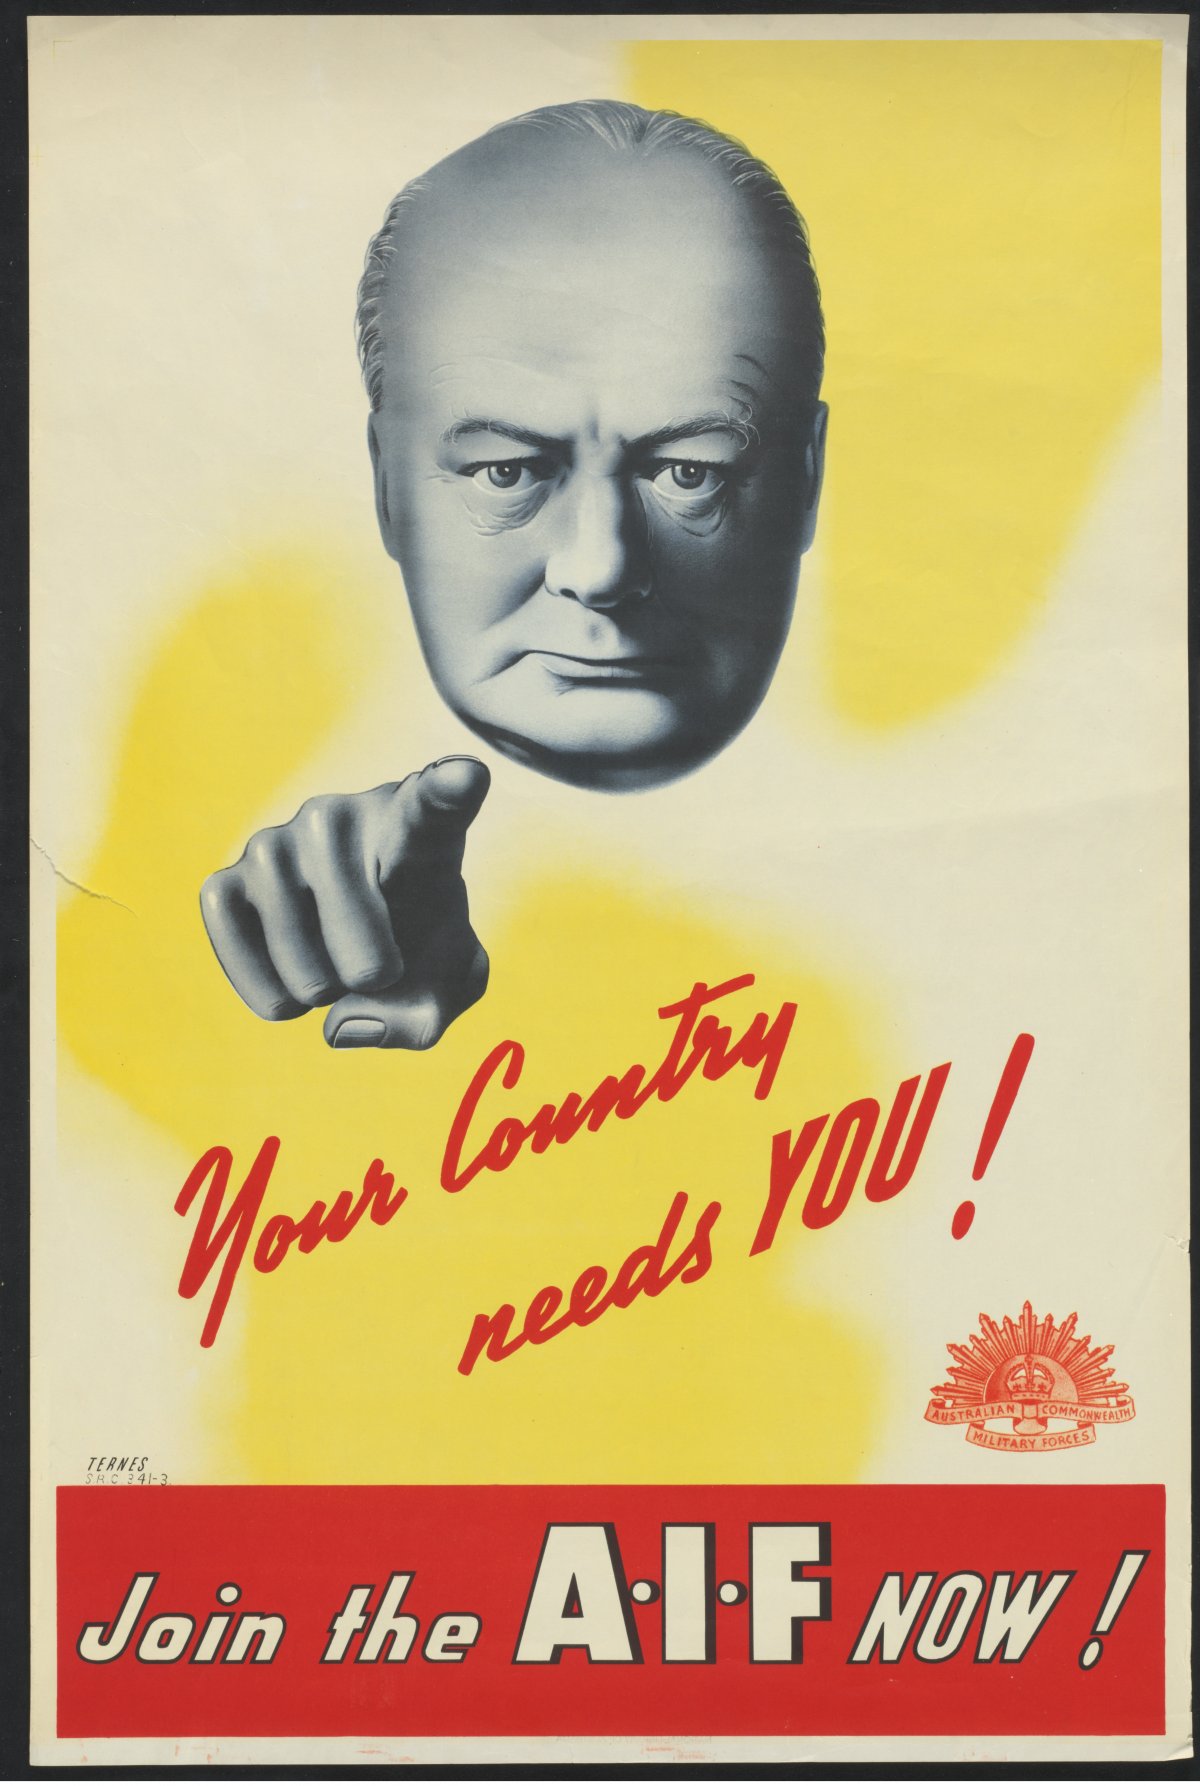 A wartime recruitment poster. In the upper middle of the poster is the head of Prime Minister Winston Churchill. He is staring directly at the viewer with a stern expression. Below him to the left is his detached hand with his index finger pointing directly at the viewer. Both head and hand are stylised in black and white. They float on a background of white and yellow swirls. Underneath the hand in red script are the words "Your Country needs YOU" beneath that, a red banner reading "Join the AIF now! 